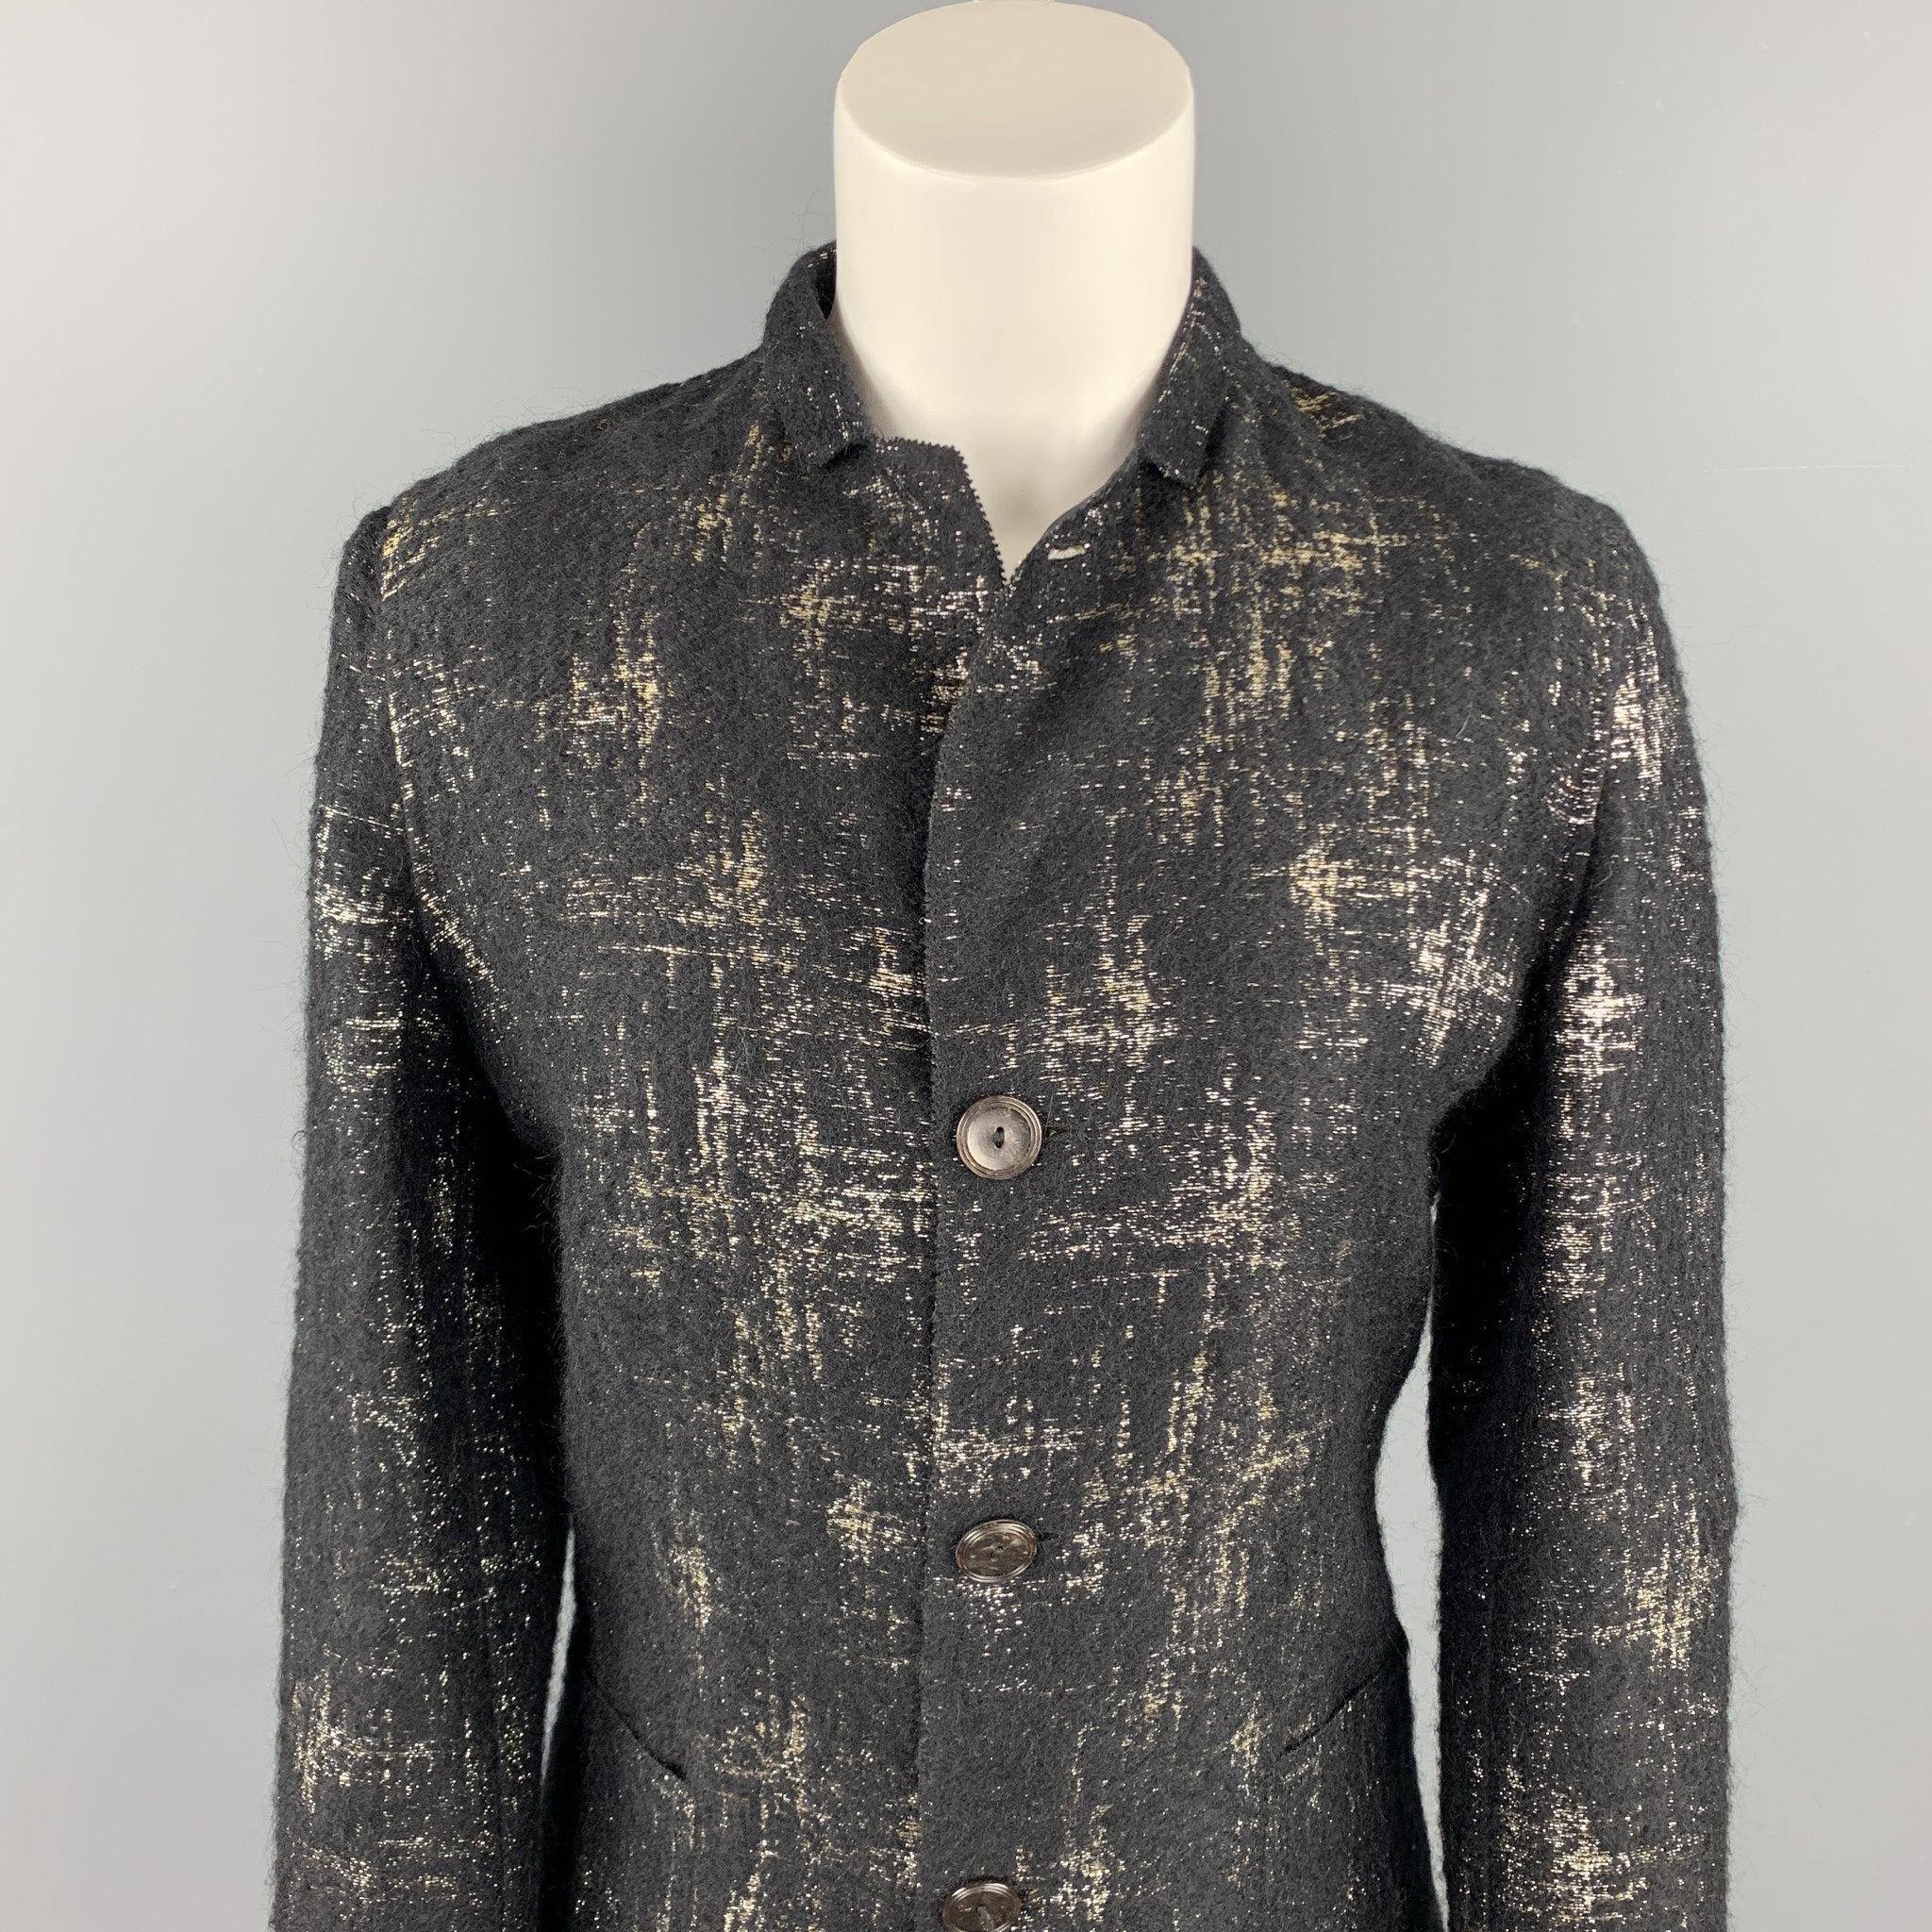 JEAN PAUL GAULTIER Femme jacket comes in a black & silver textured silk featuring a mary jane style, front pockets, and a buttoned closure. Made in Italy.Excellent
Pre-Owned Condition. 

Marked:   US 8
 UK 10
 IT 42
 

Measurements: 
 
Shoulder: 16